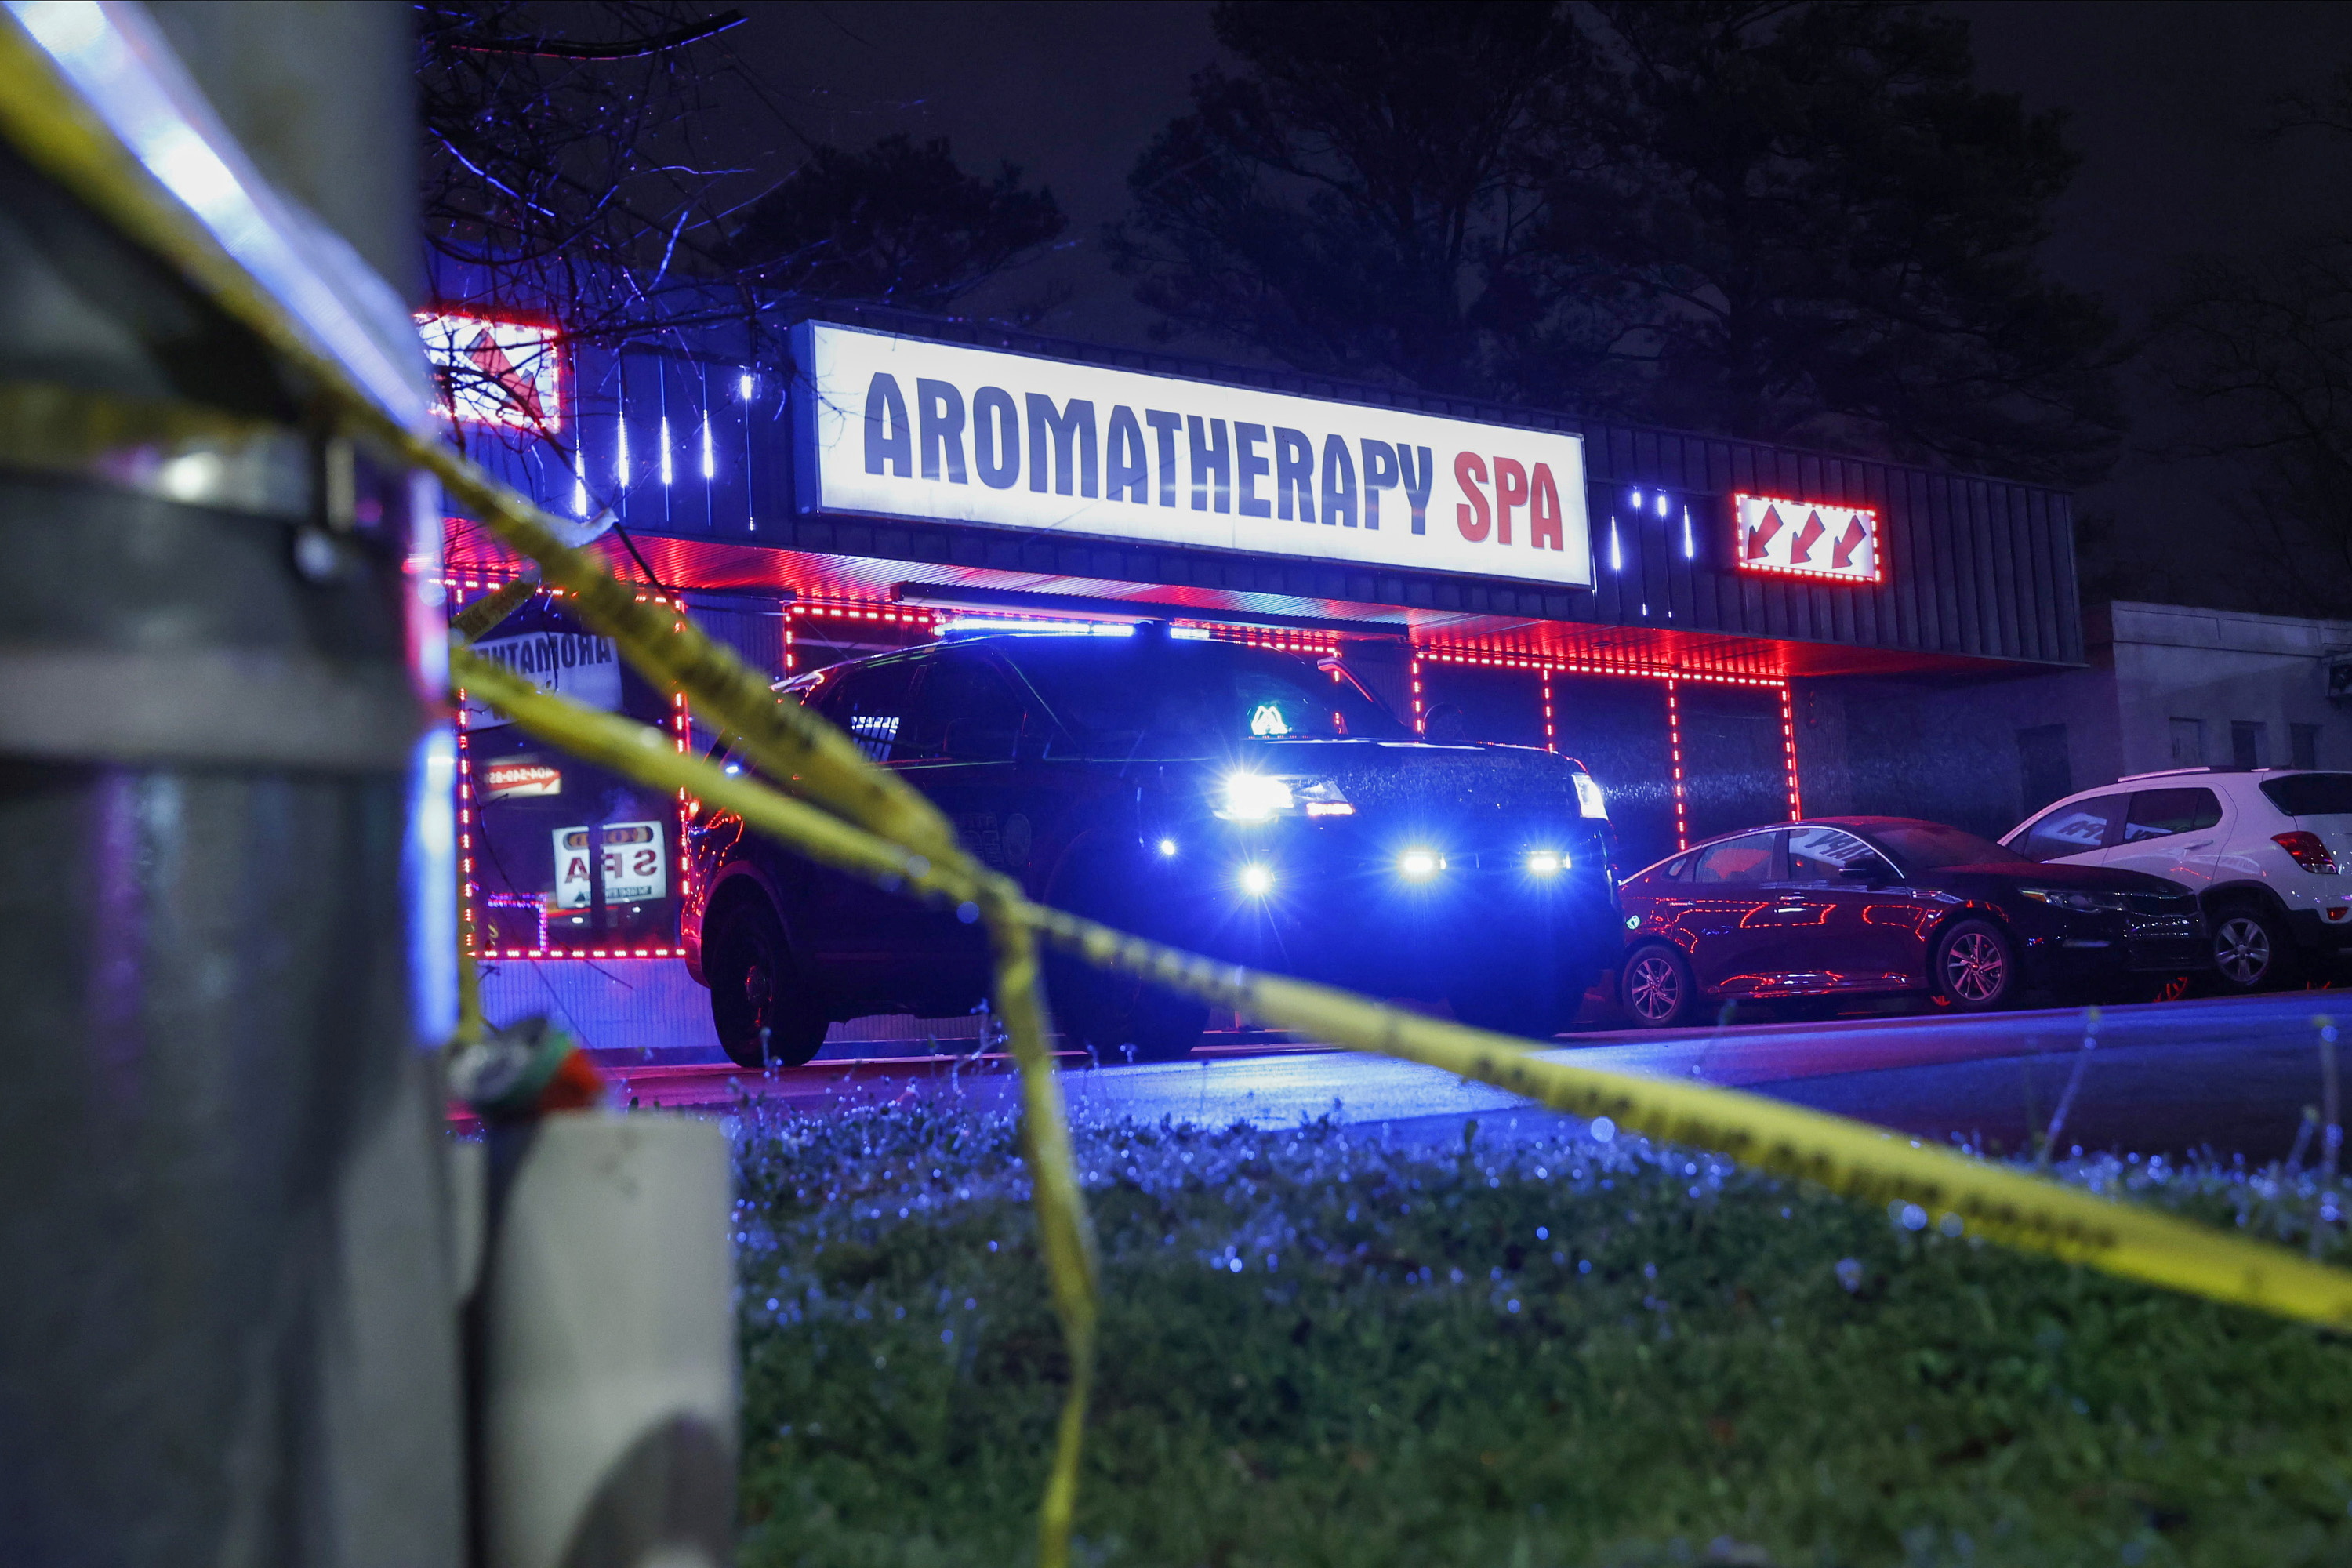 Crime scene tape is seen outside Aromatherapy Spa after shootings at a massage parlor and two day spas in the Atlanta area, in Georgia